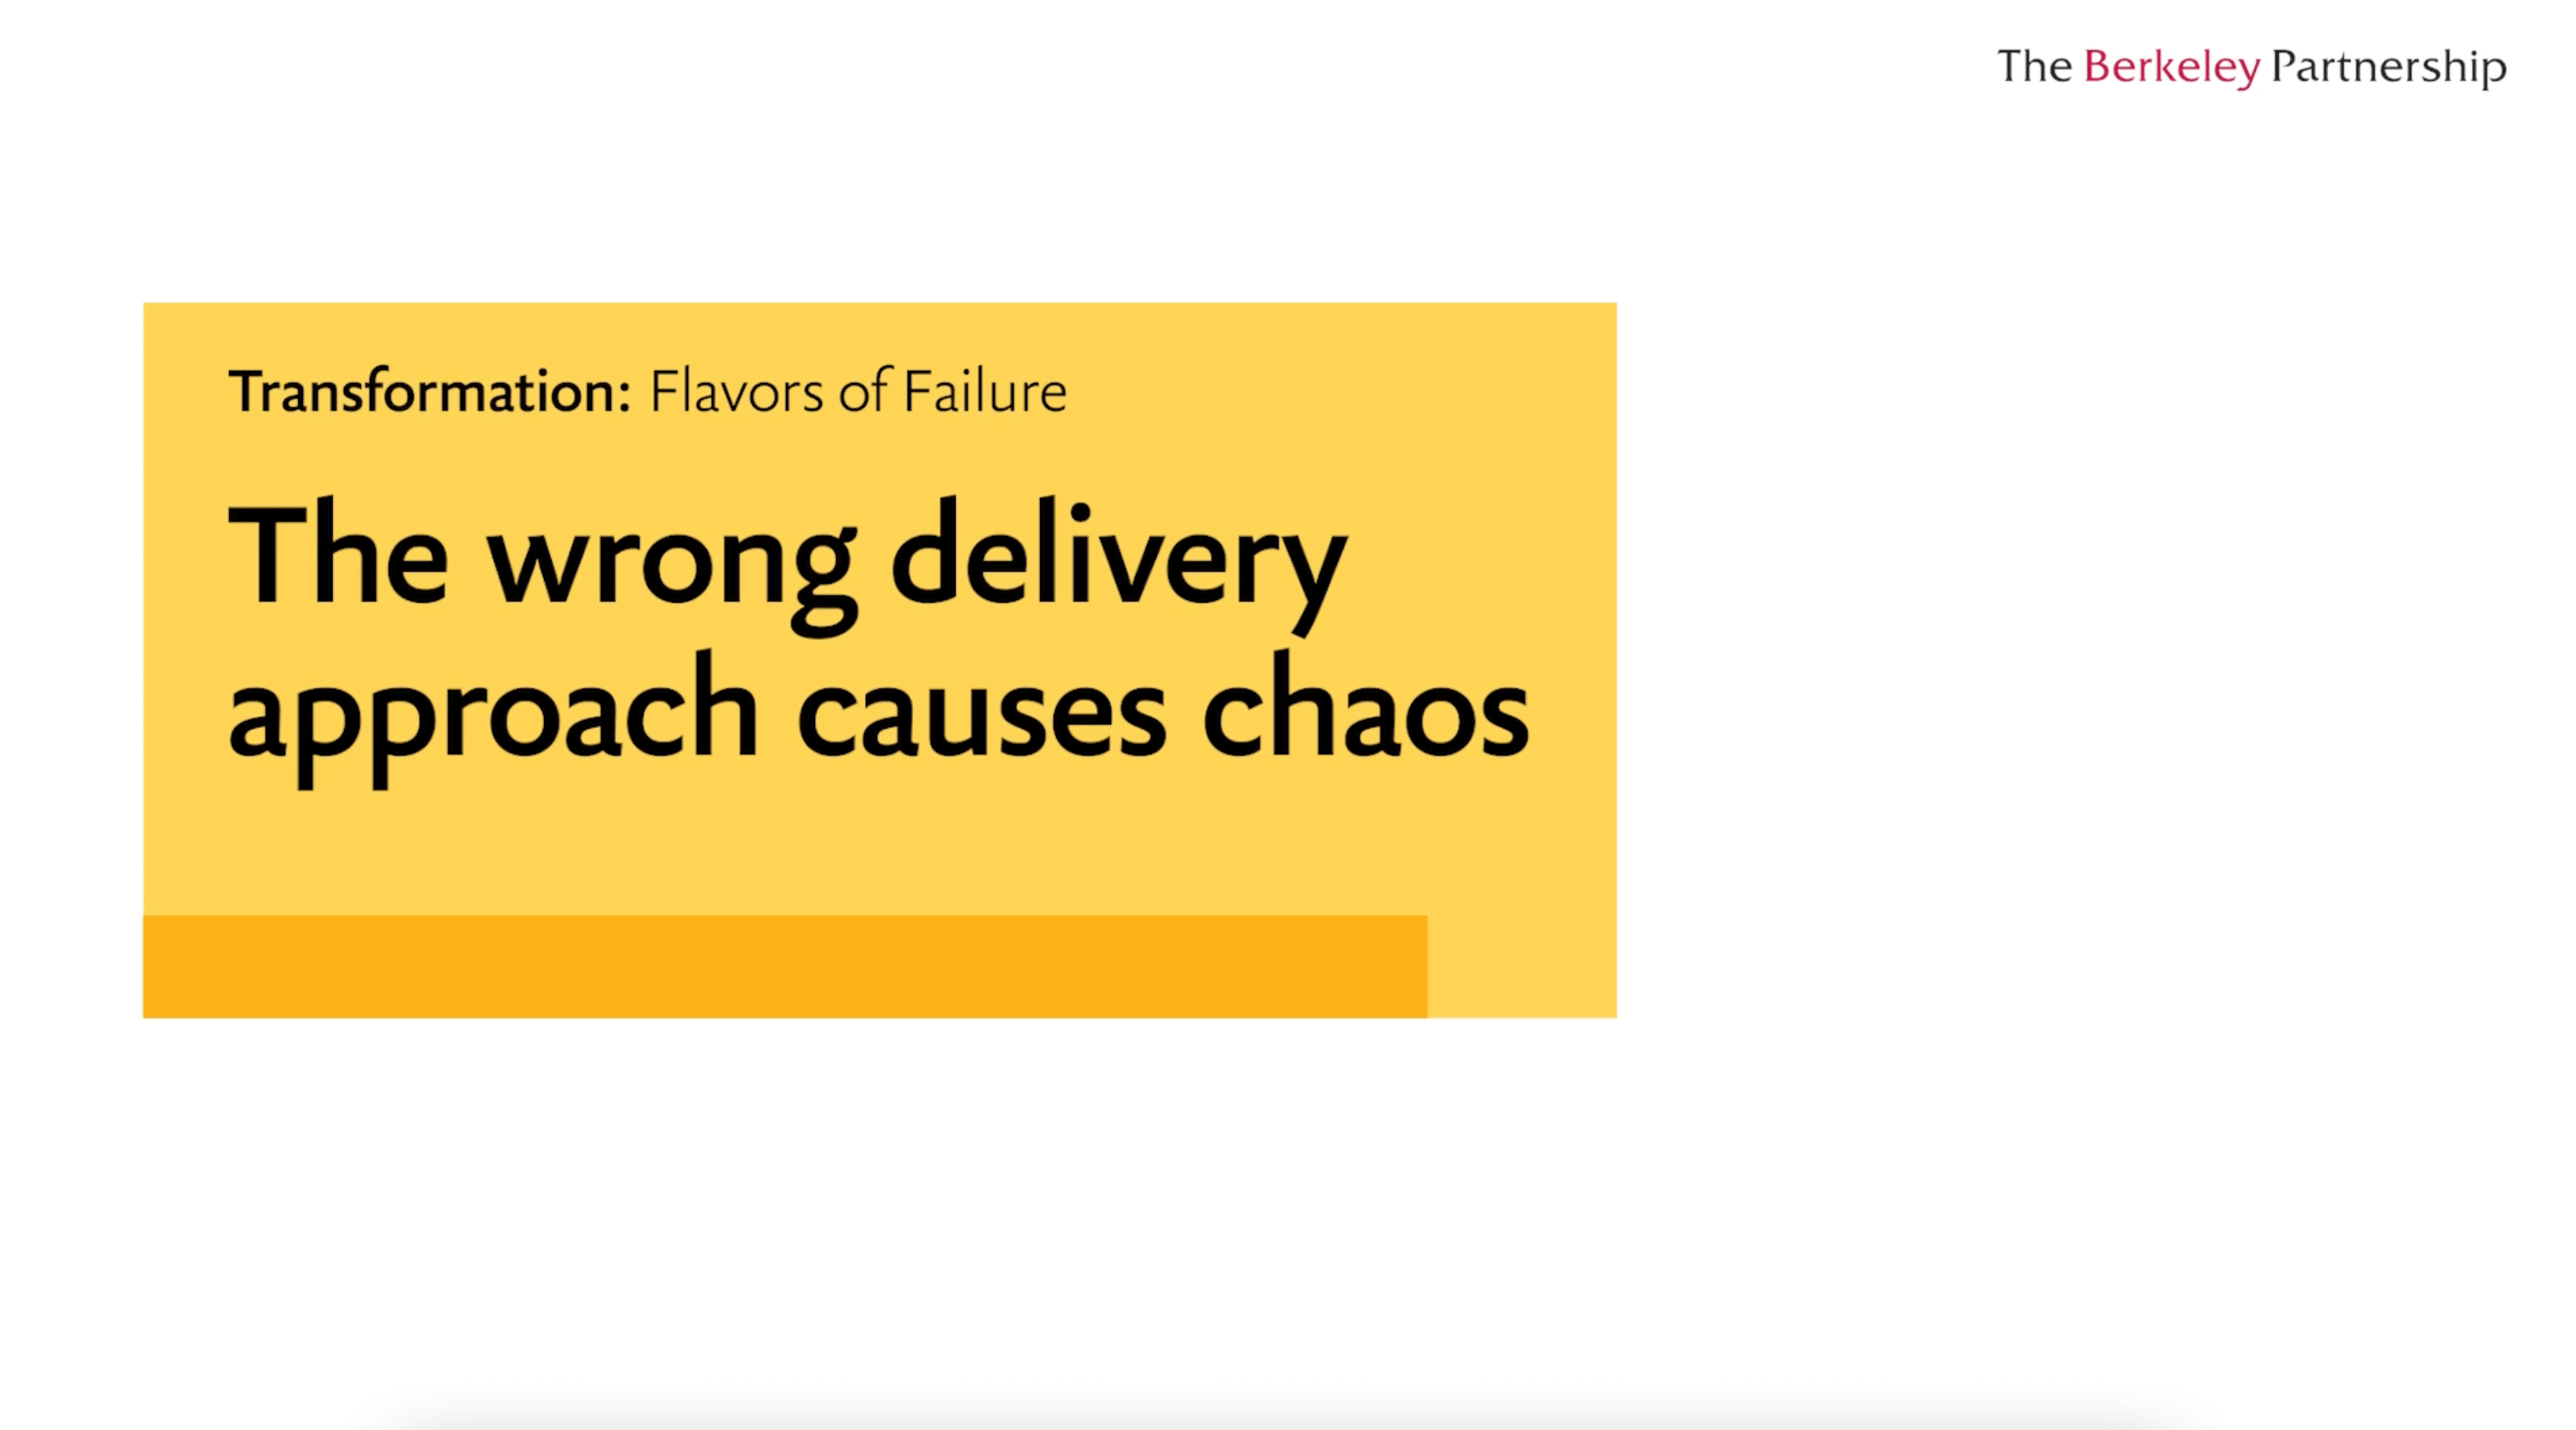 Flavors of failure: The wrong delivery approach causes chaos